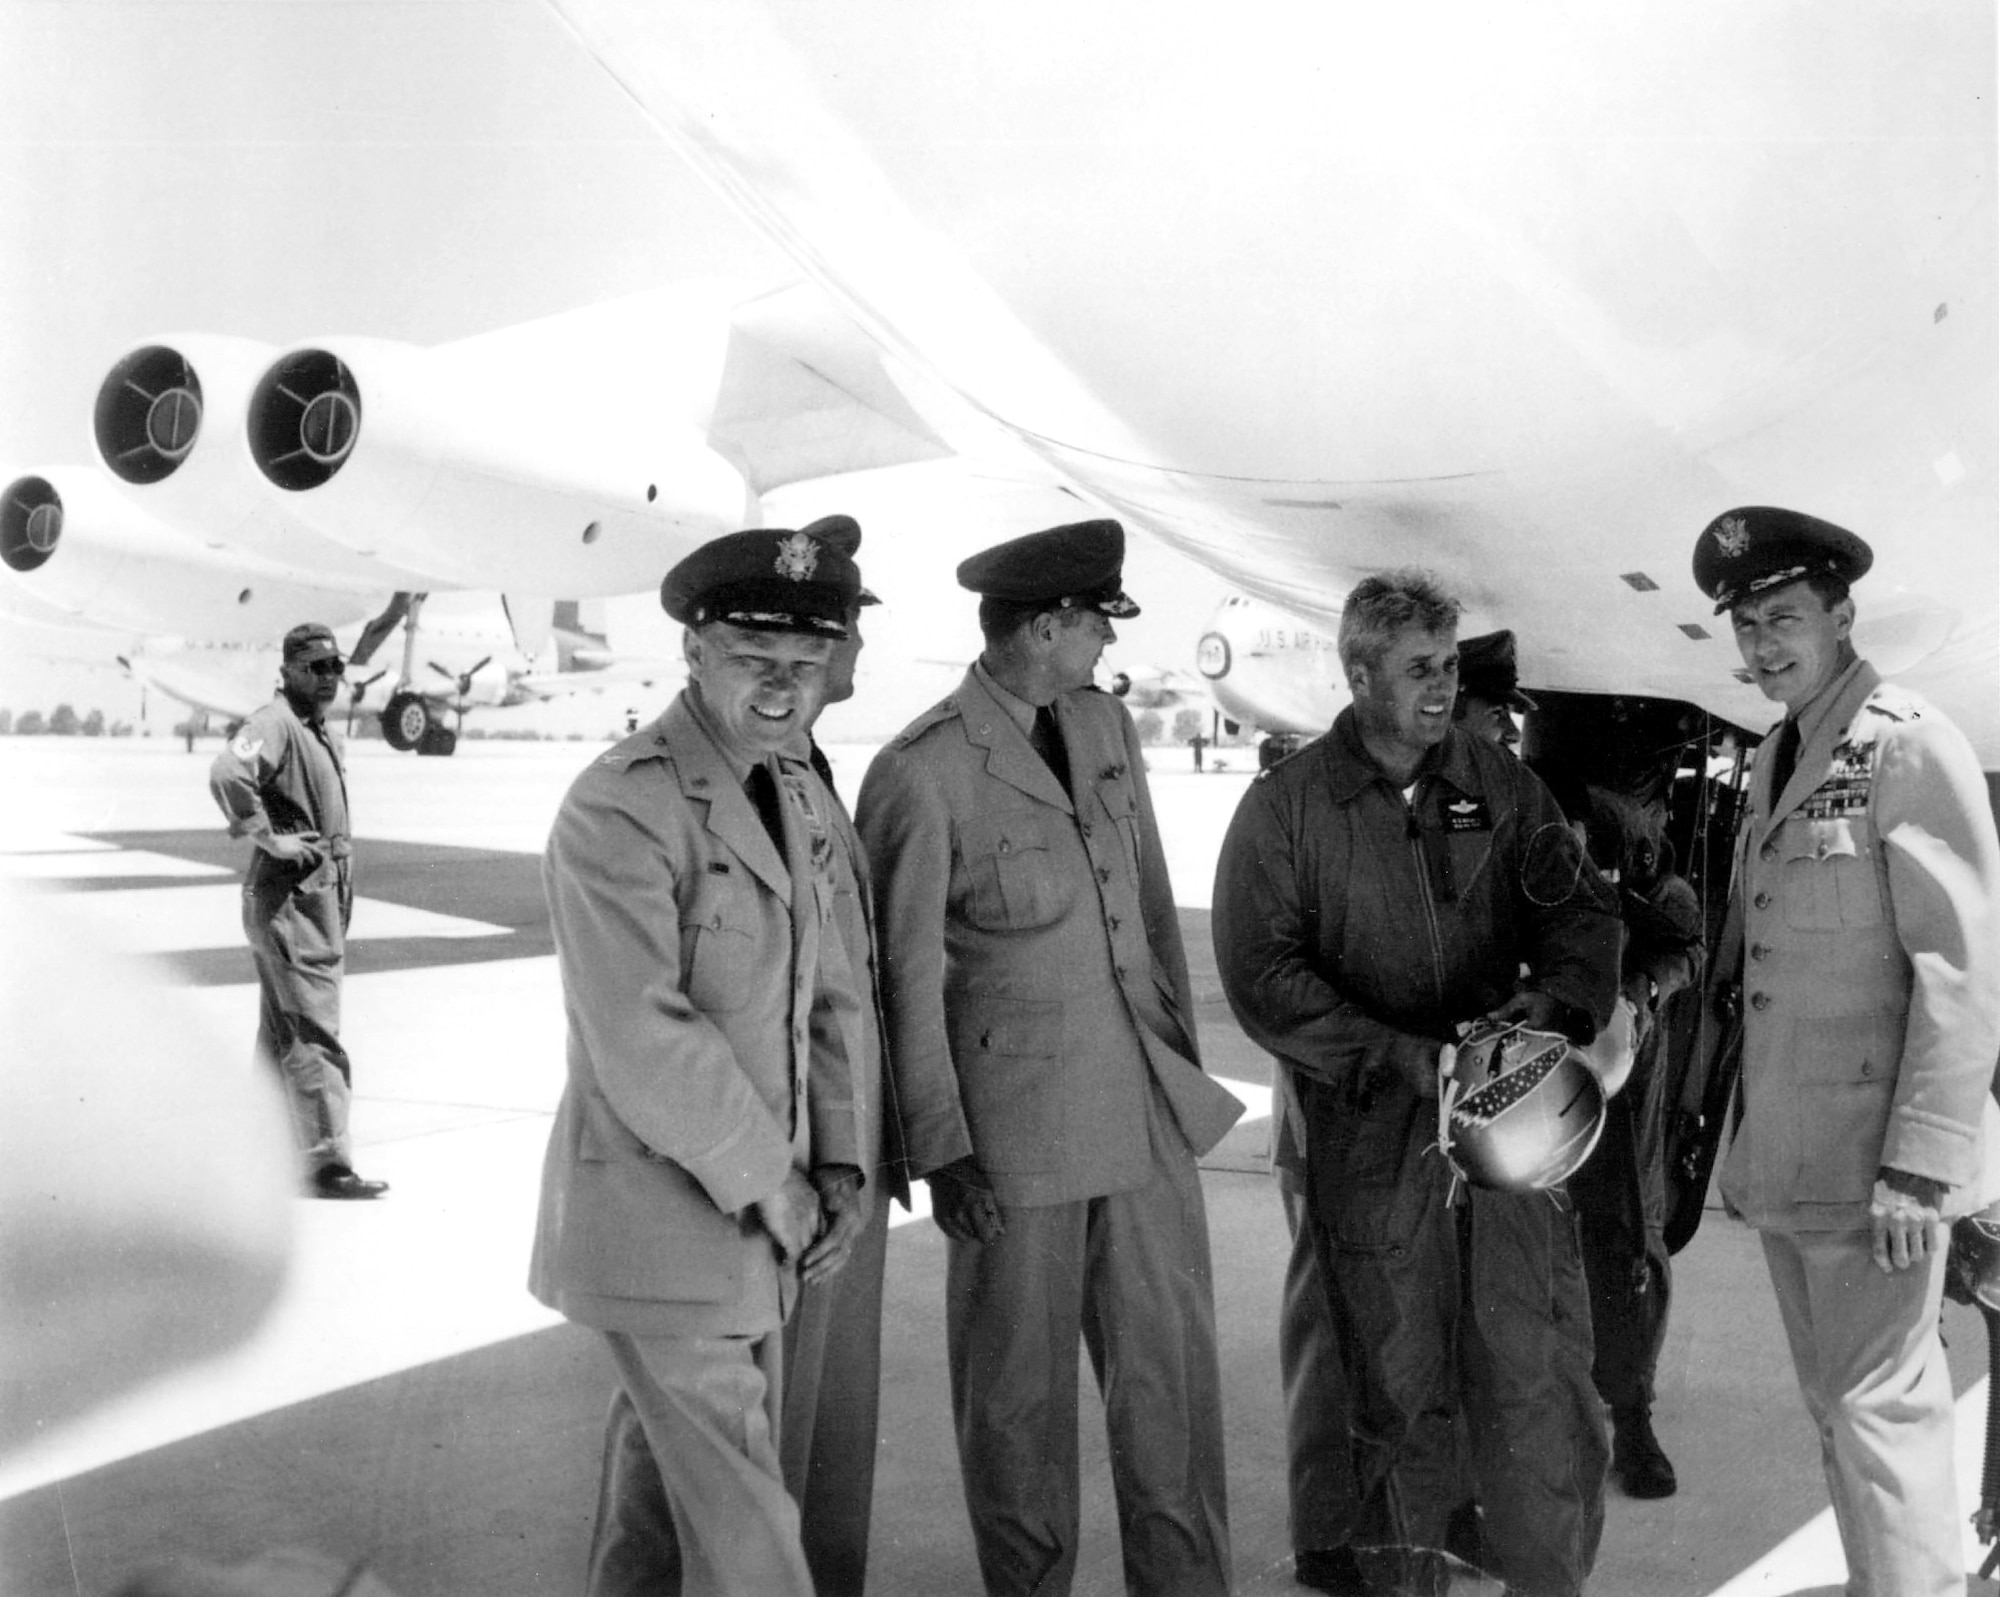 CASTLE AIR FORCE BASE, Calif. -- Retired Brig. Gen. William Eubank, the 93rd Bomb Wing commander, talks with Air Force officers on the flightline here after the first B-52 Stratofortress operational flight June 29, 1955.  (U.S. Air Force photo)